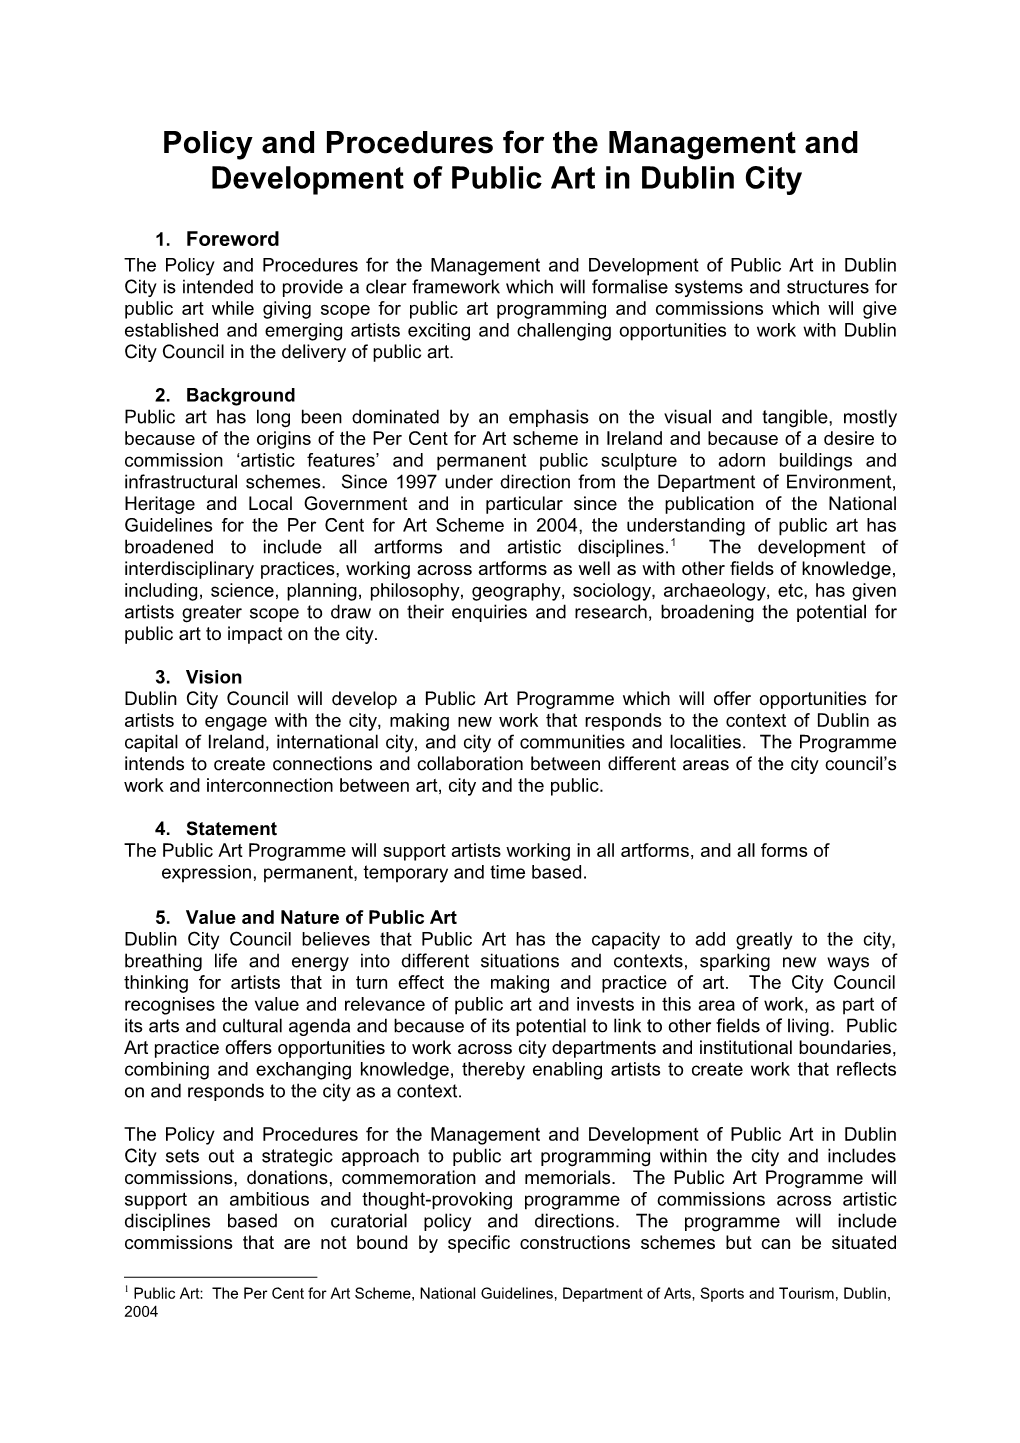 Policy and Procedures for the Management and Development of Public Art in Dublin City